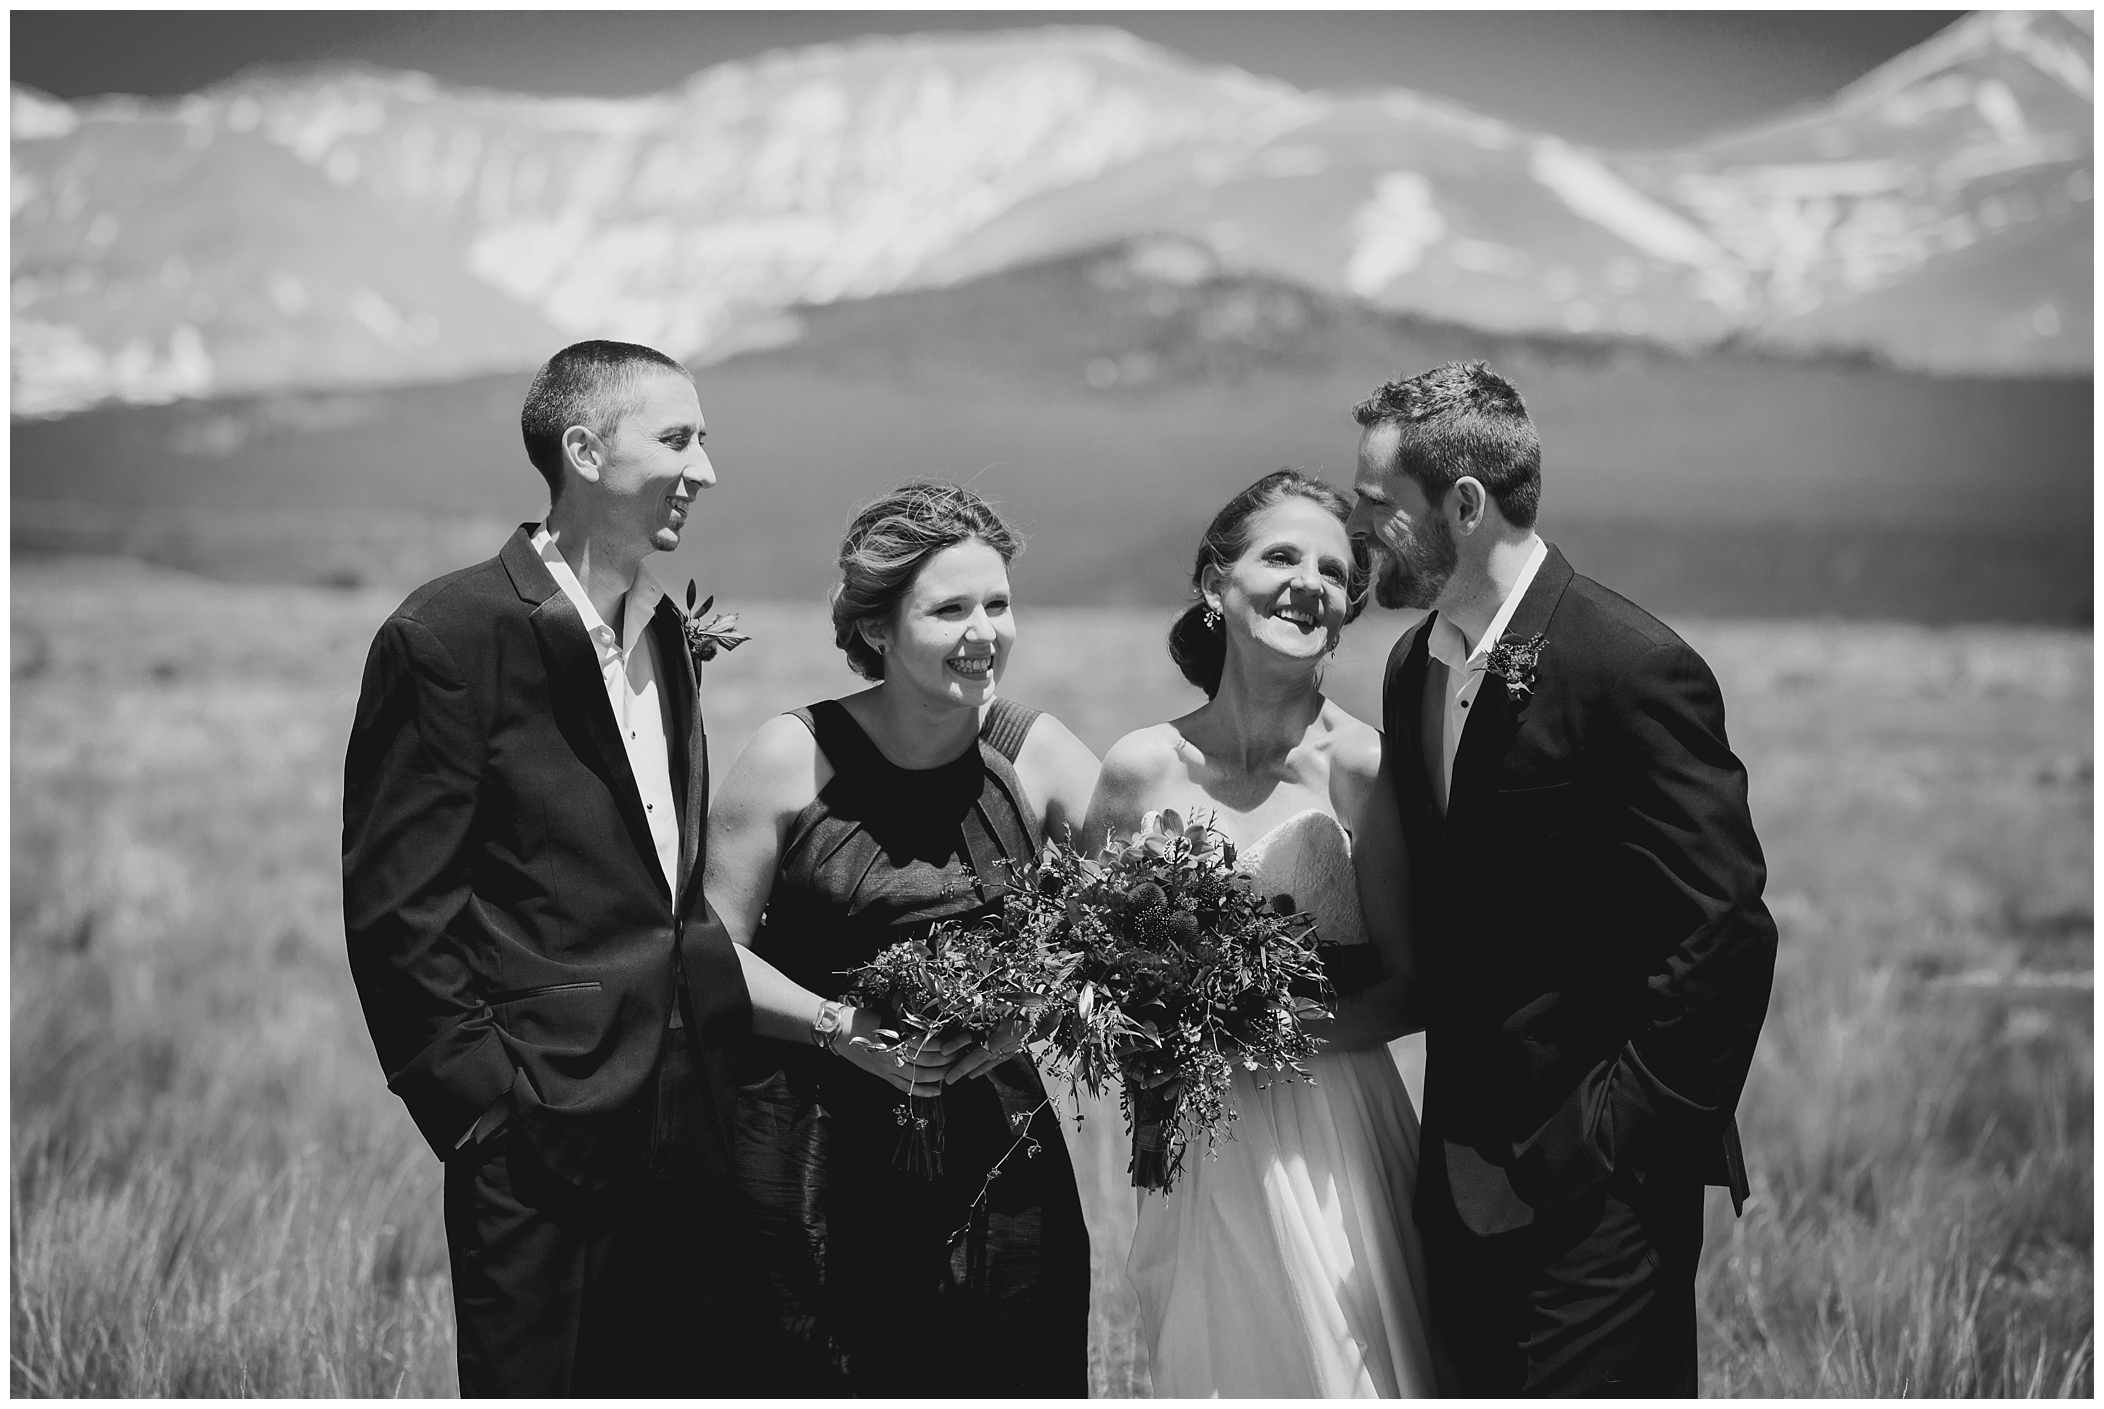 picture of Copper Mountain wedding photography 